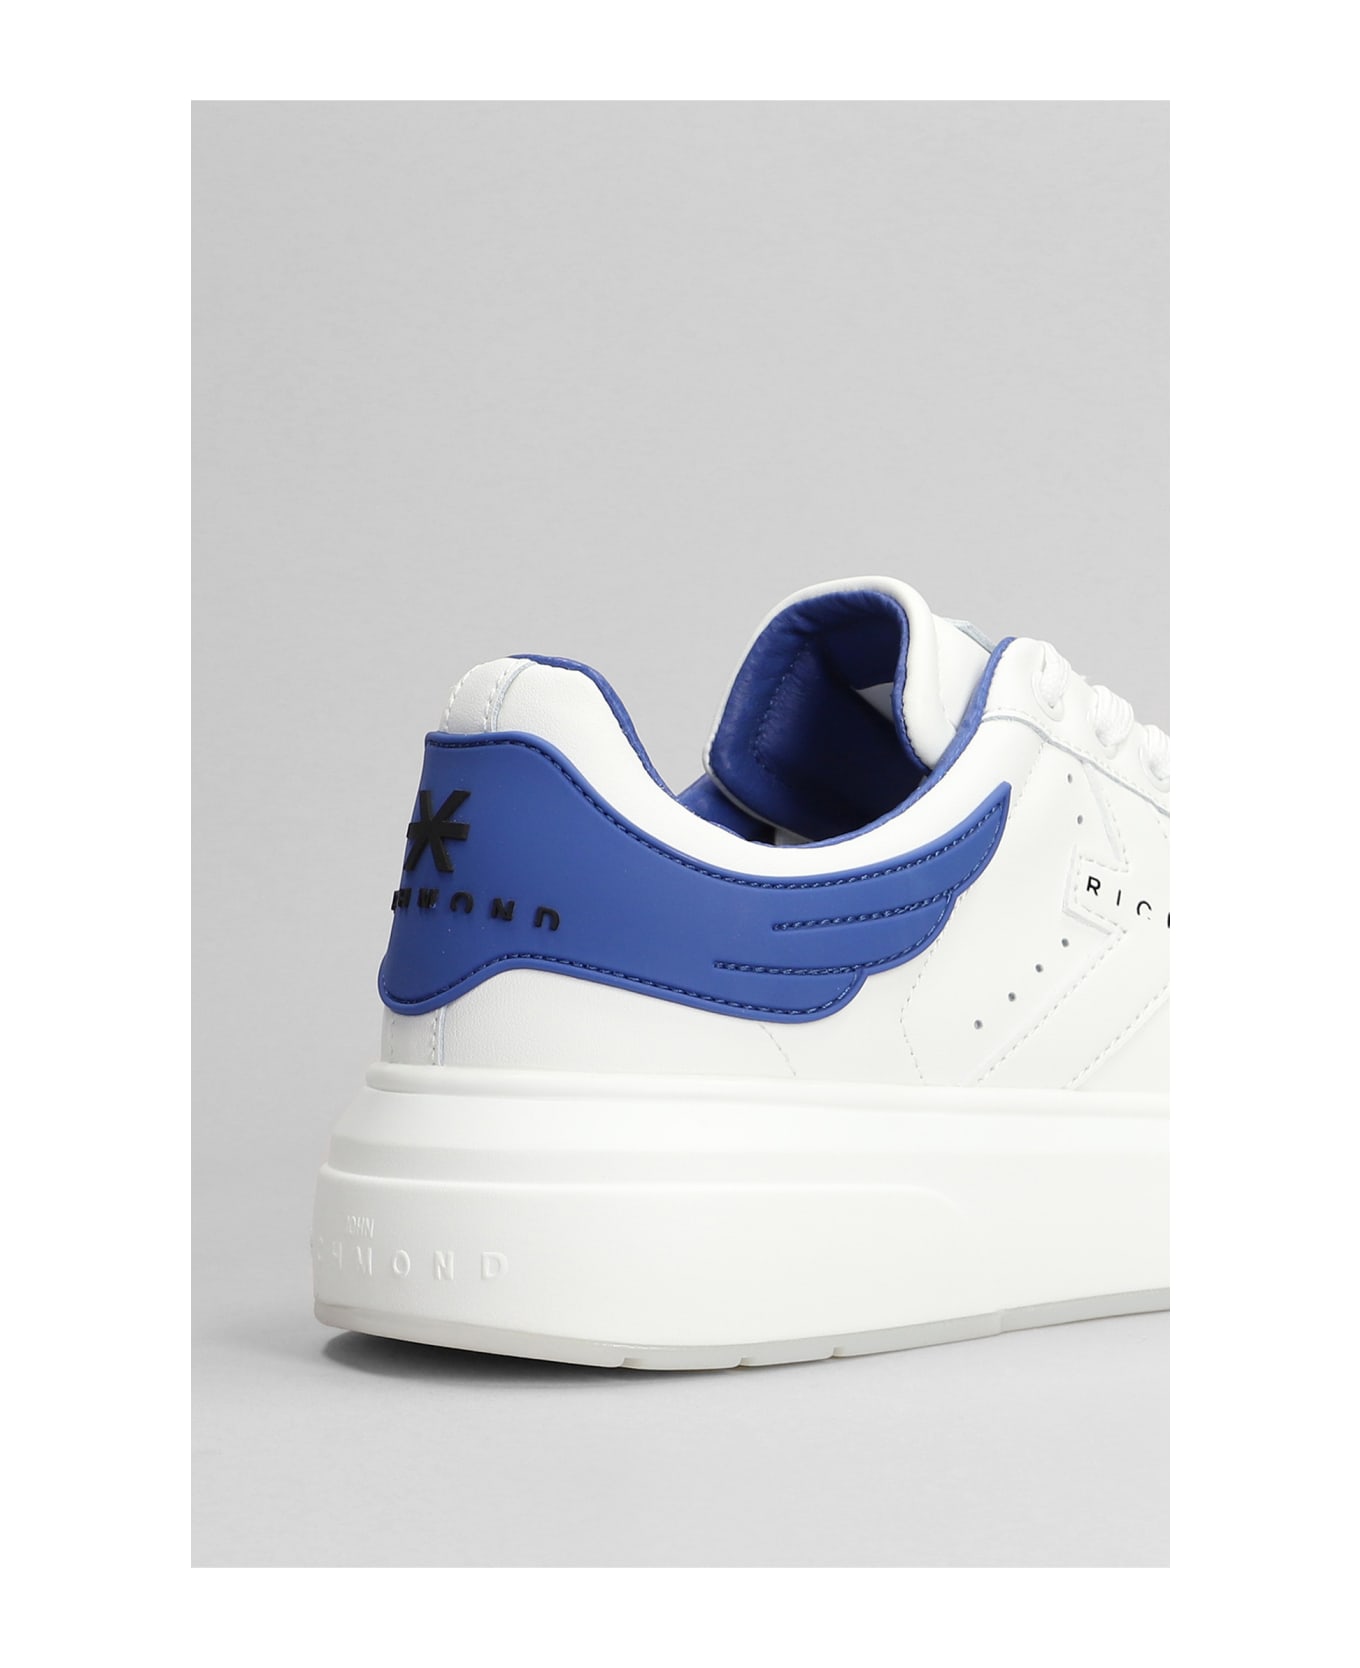 John Richmond Sneakers In White Leather - white スニーカー